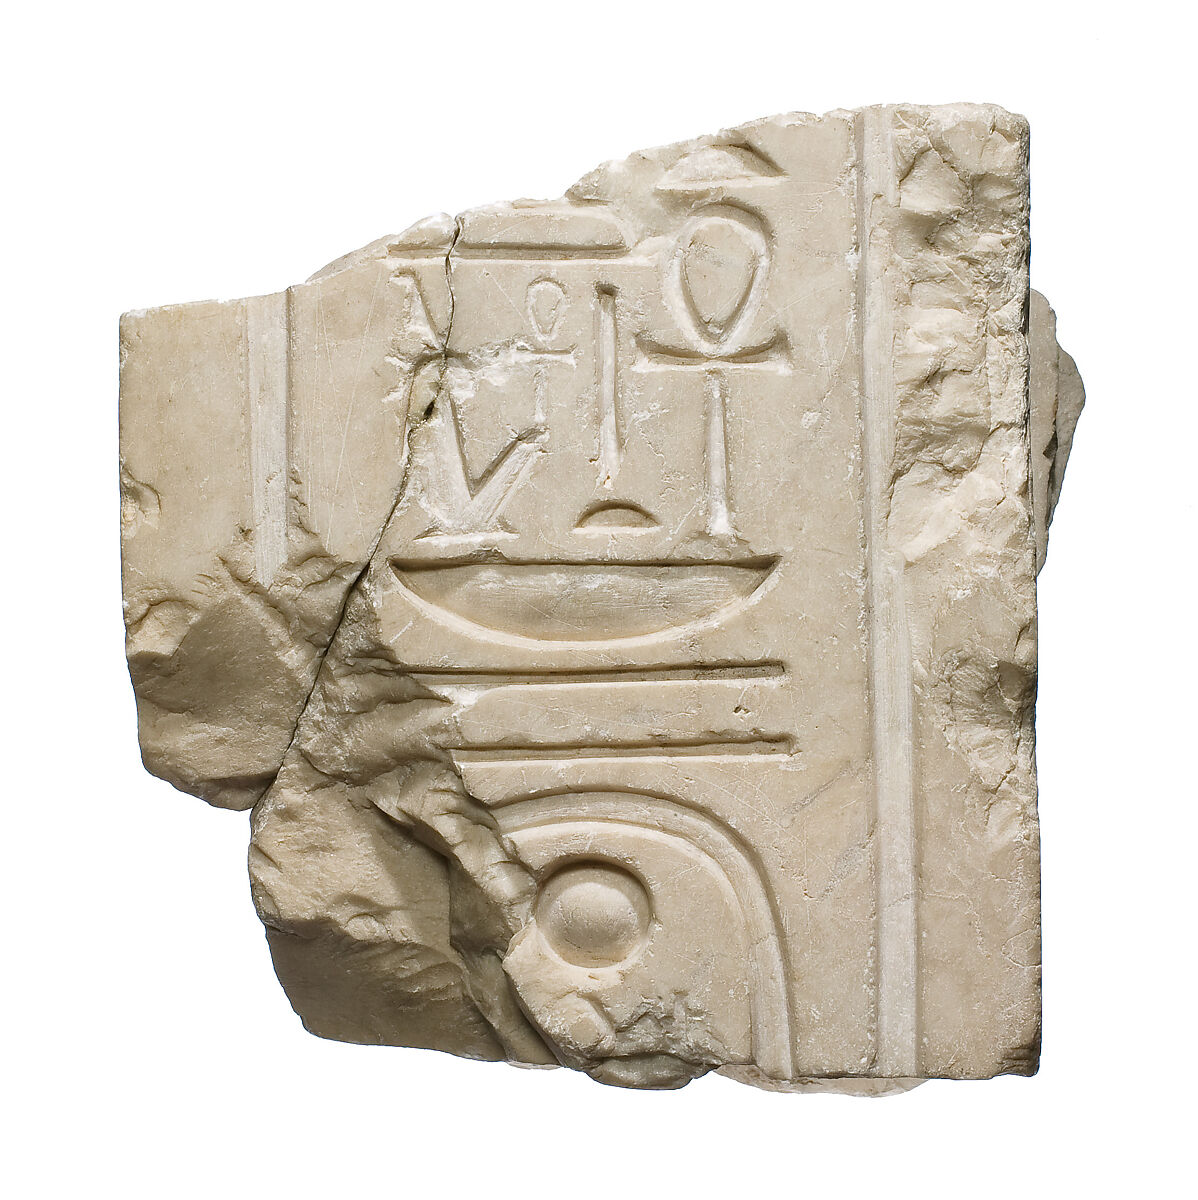 Back pillar of Torso with titles and cartouche of Akhenaten, Indurated limestone 